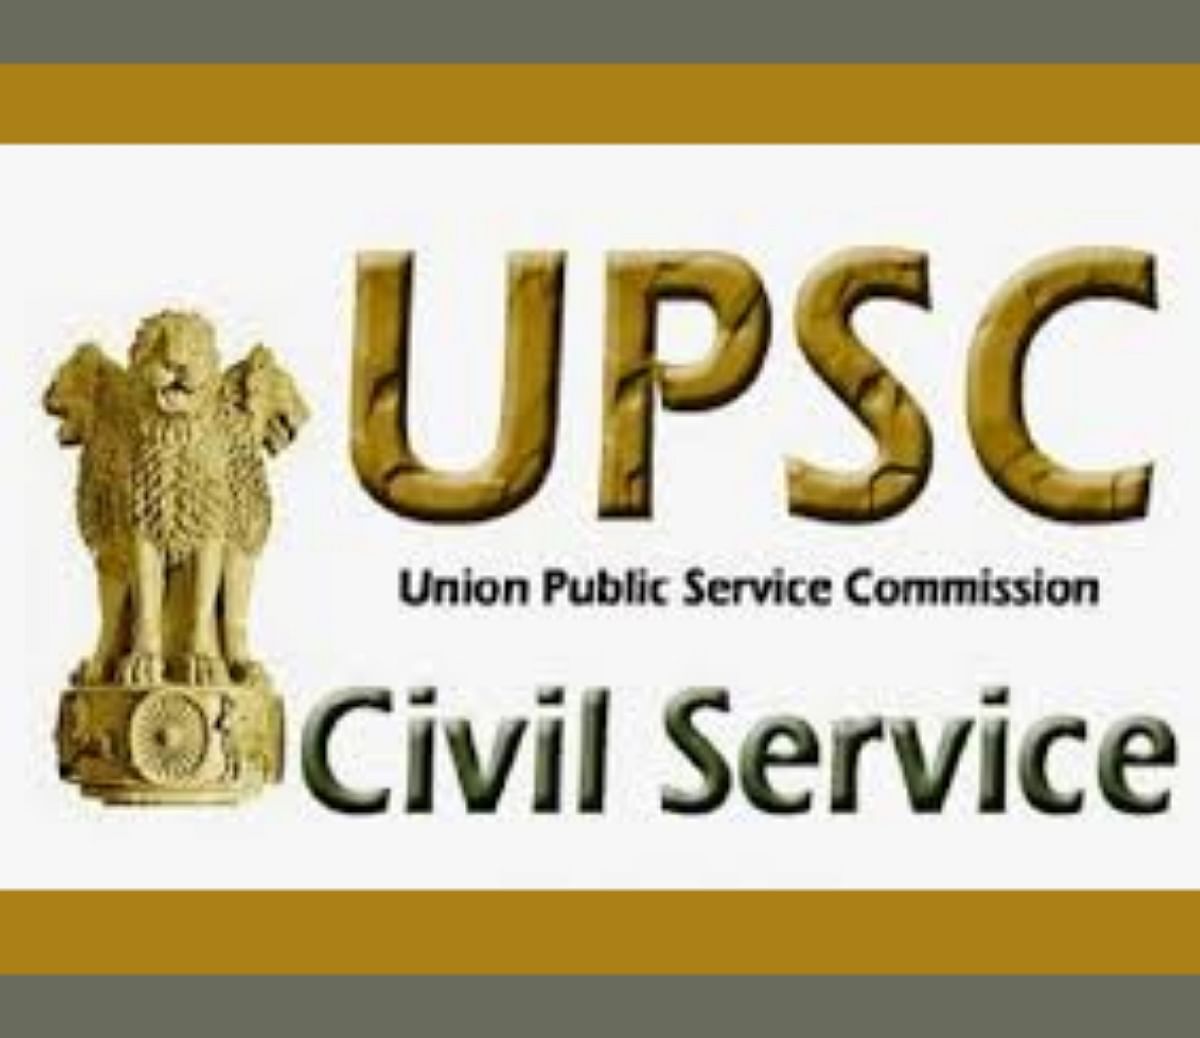 UPSC Civil Service Exam 2019 Result: Cut off Marks Released, Details Here